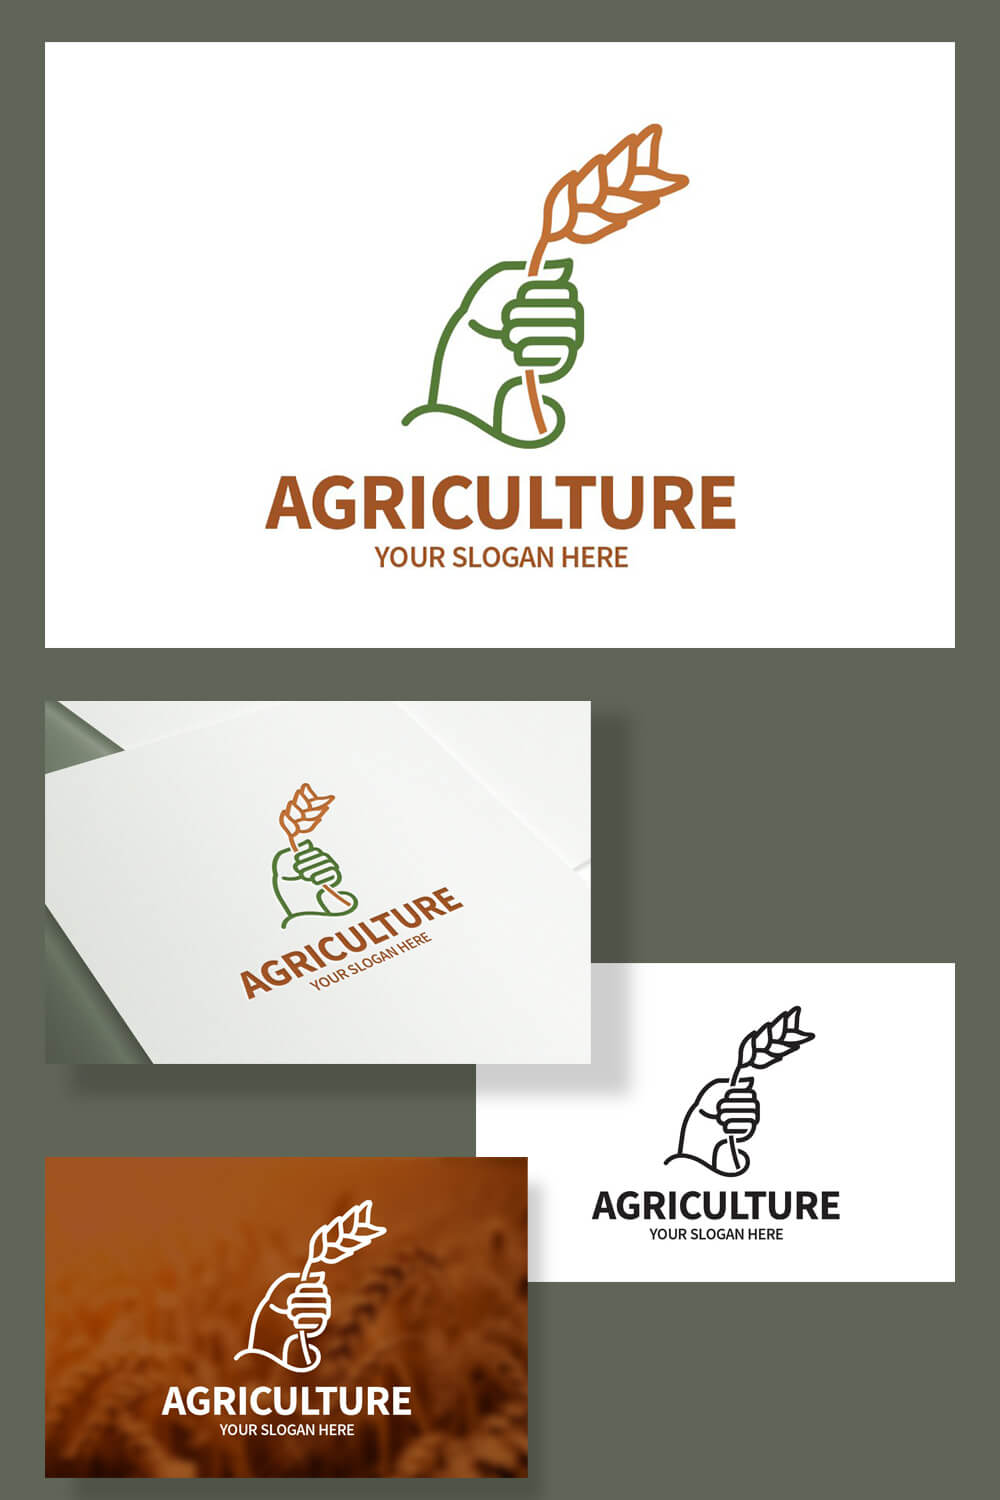 Large color agricultural logo and three small business cards.